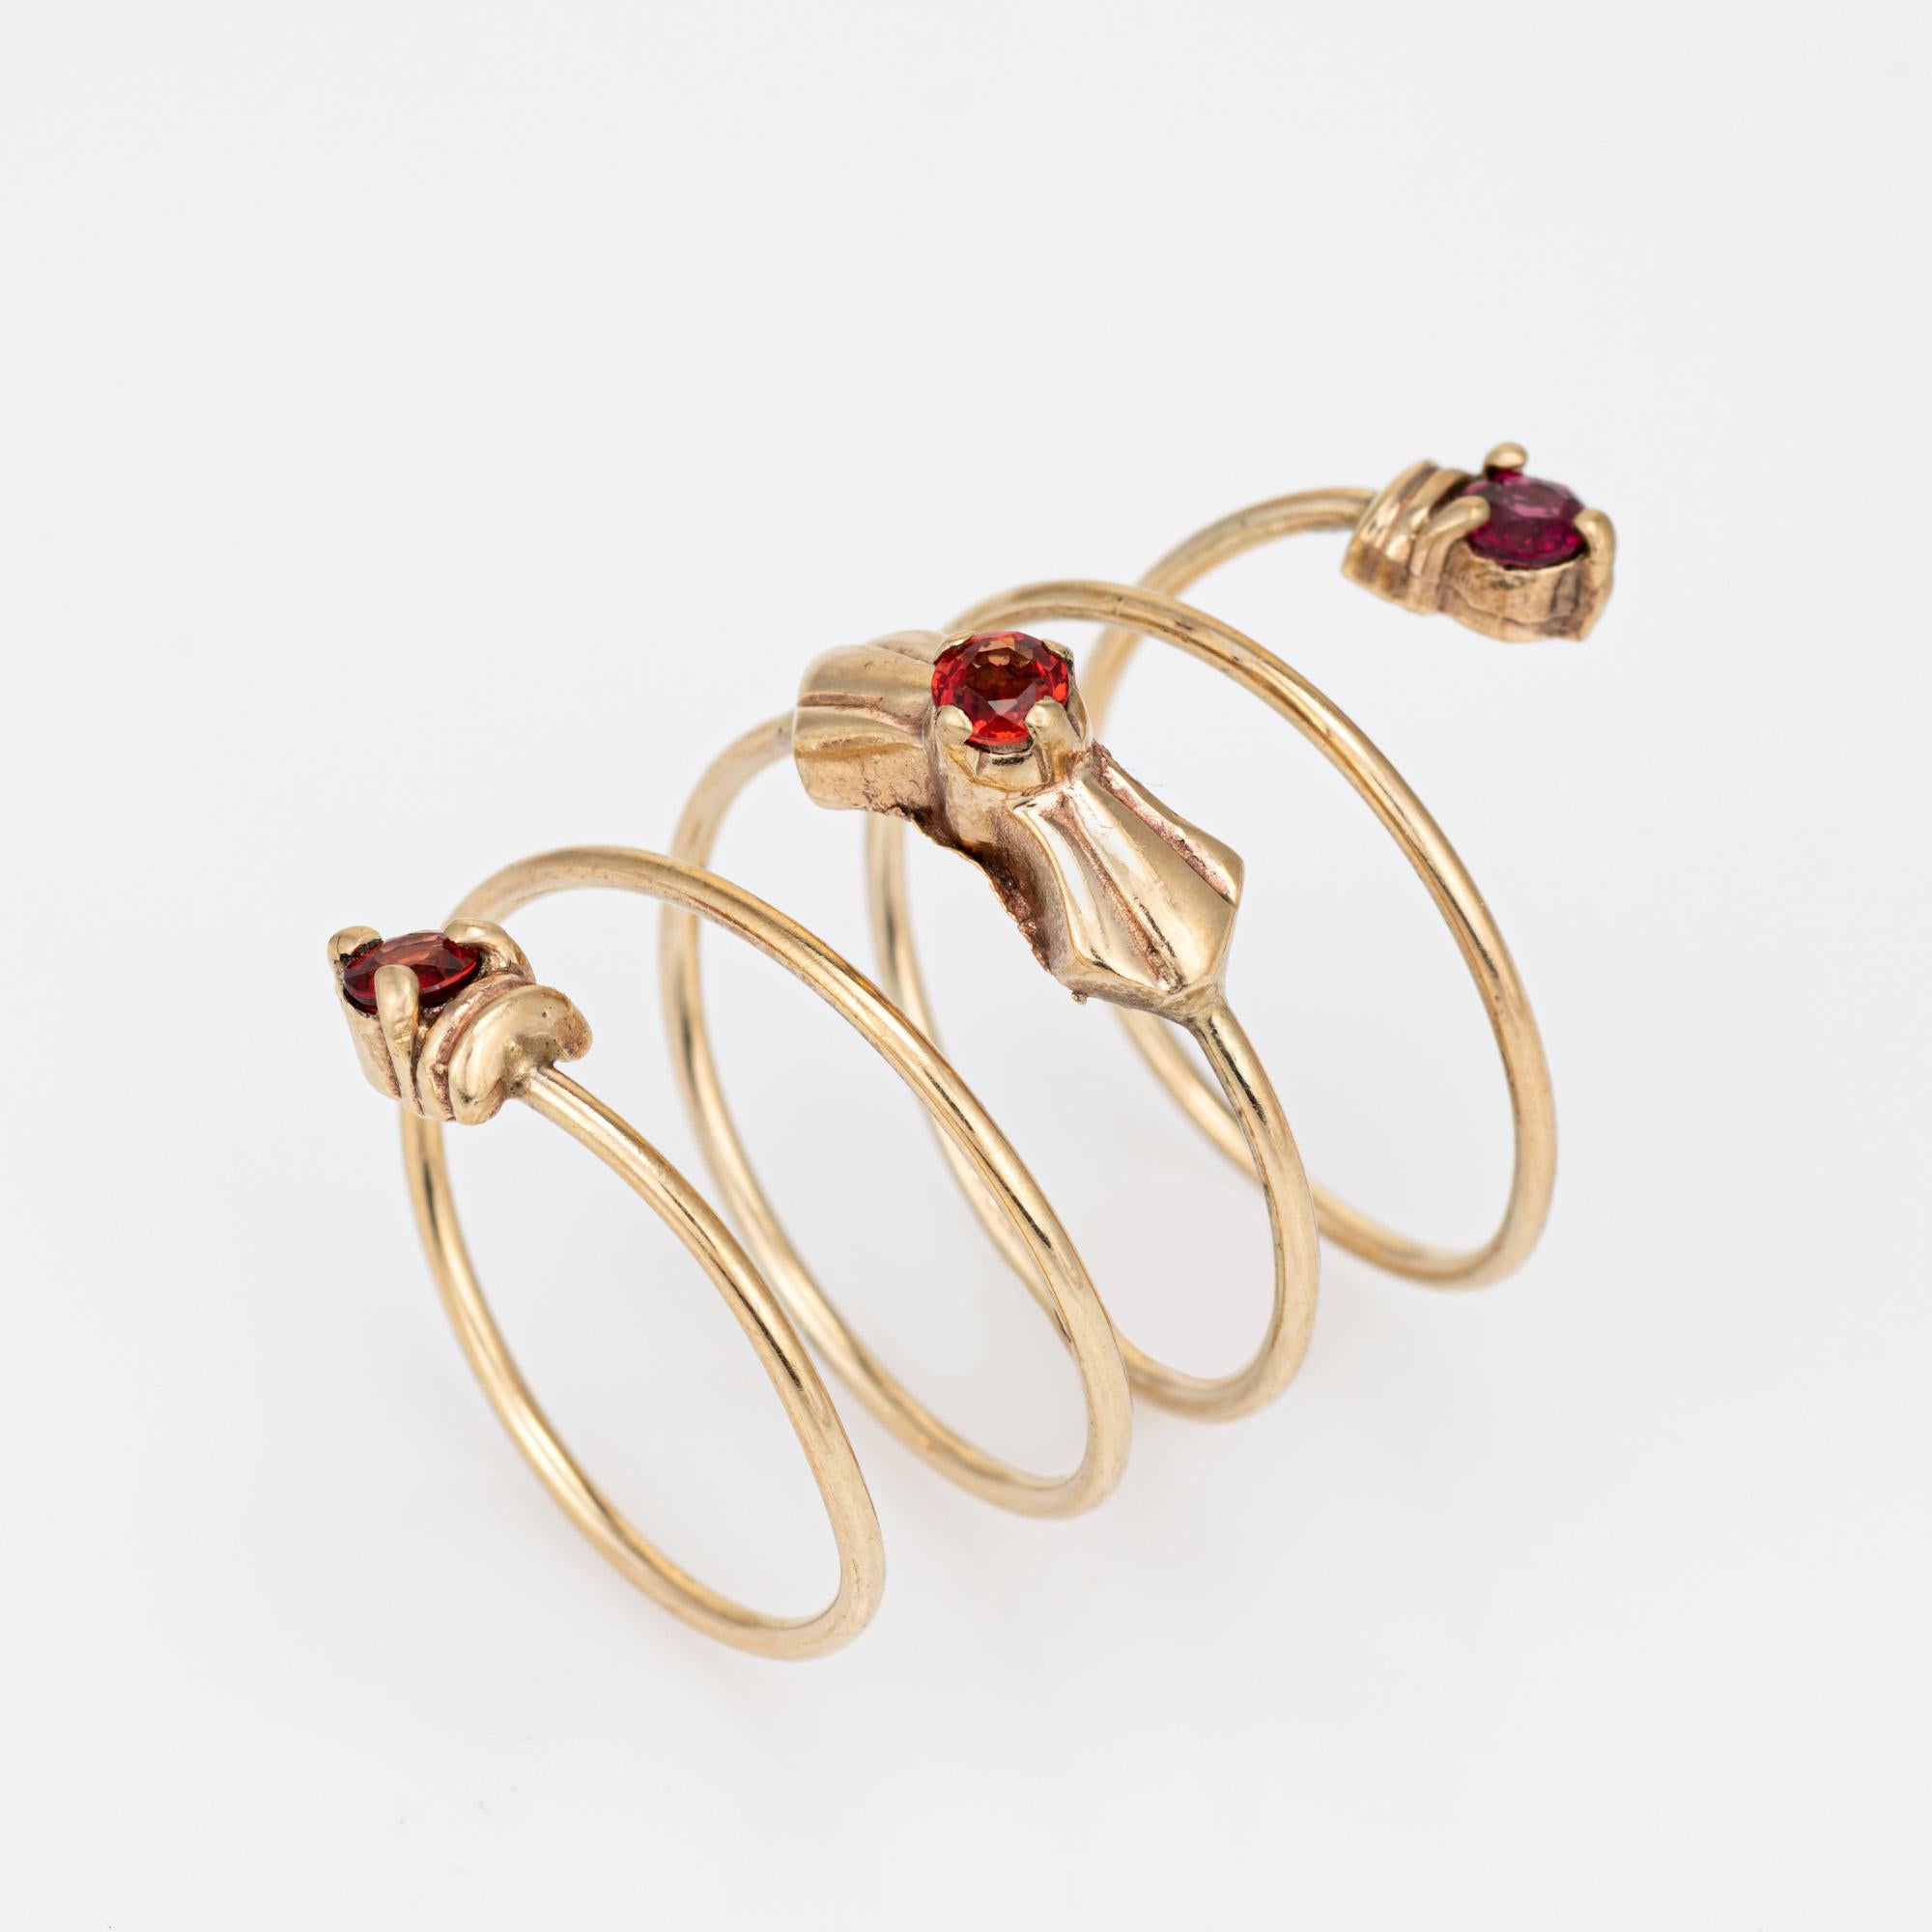 Stylish orange sapphires 'spring' ring crafted in 10 karat yellow gold. 

Three orange sapphires measure approx. 3.5mm each. The sapphires are in very good condition and free of cracks or chips. 

The ring coils around the finger five times,